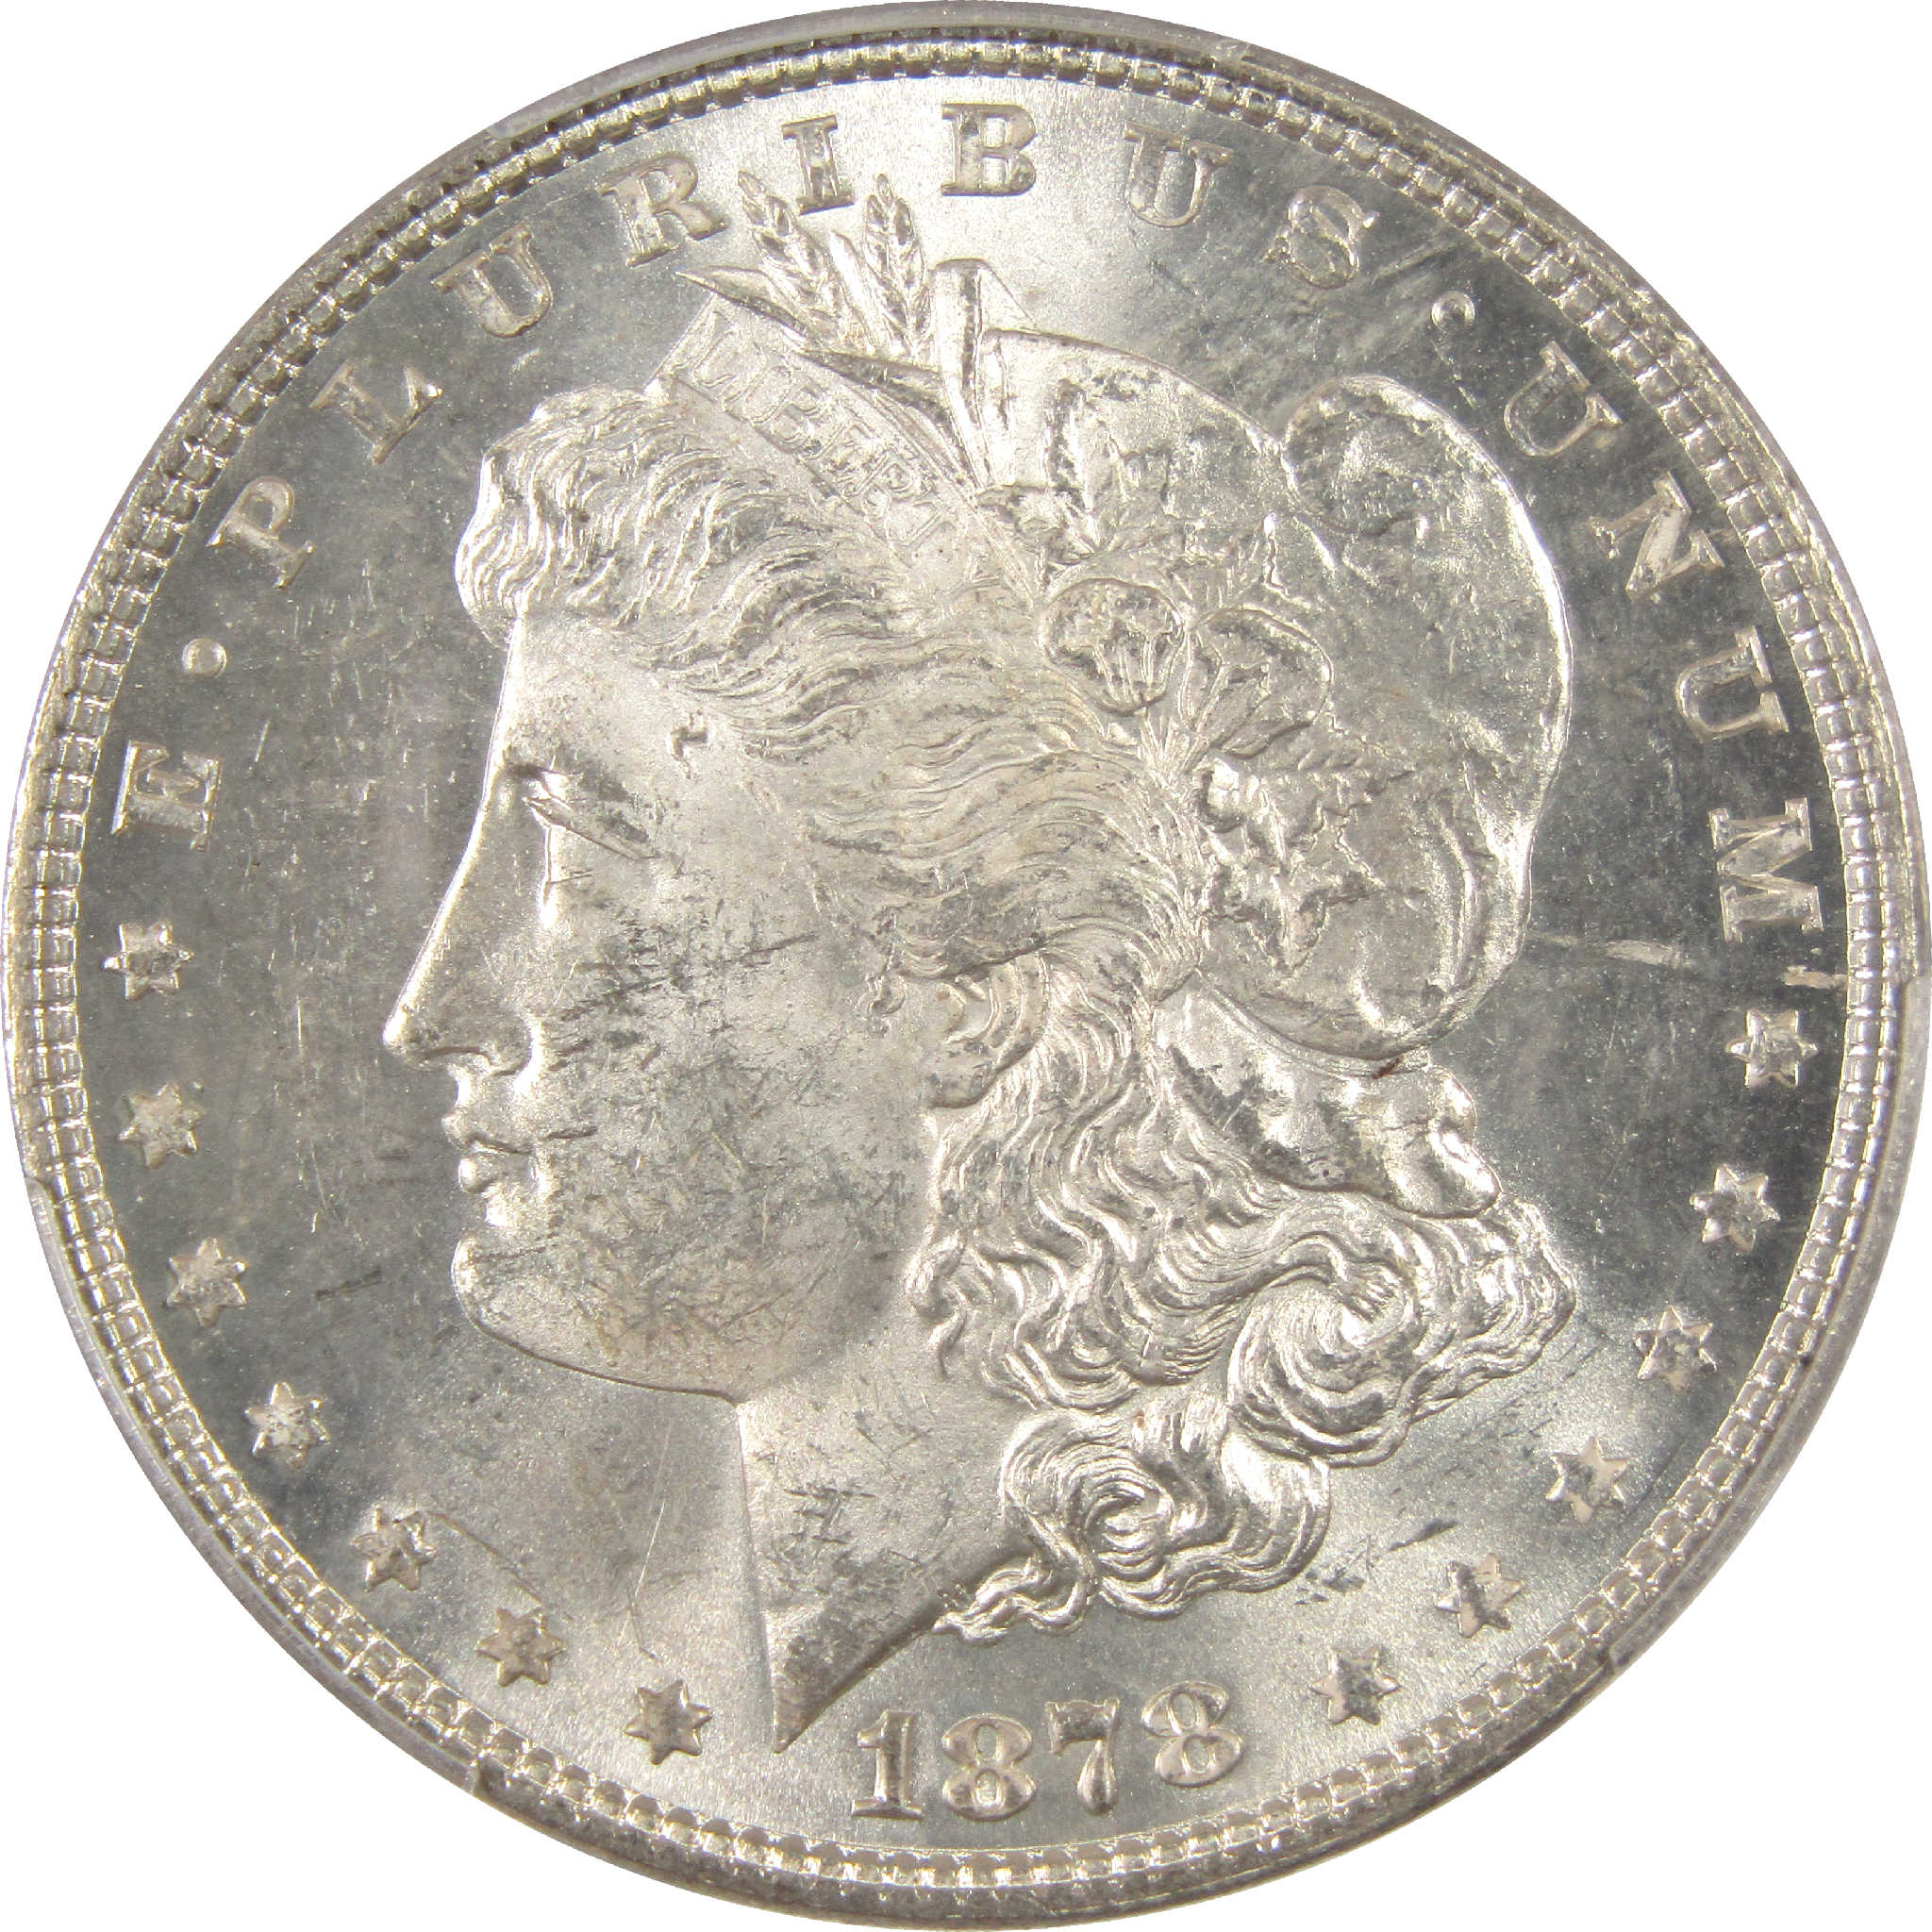 1878 7TF Rev 78 Morgan Dollar MS 62 PCGS Silver $1 Unc SKU:I11325 - Morgan coin - Morgan silver dollar - Morgan silver dollar for sale - Profile Coins &amp; Collectibles